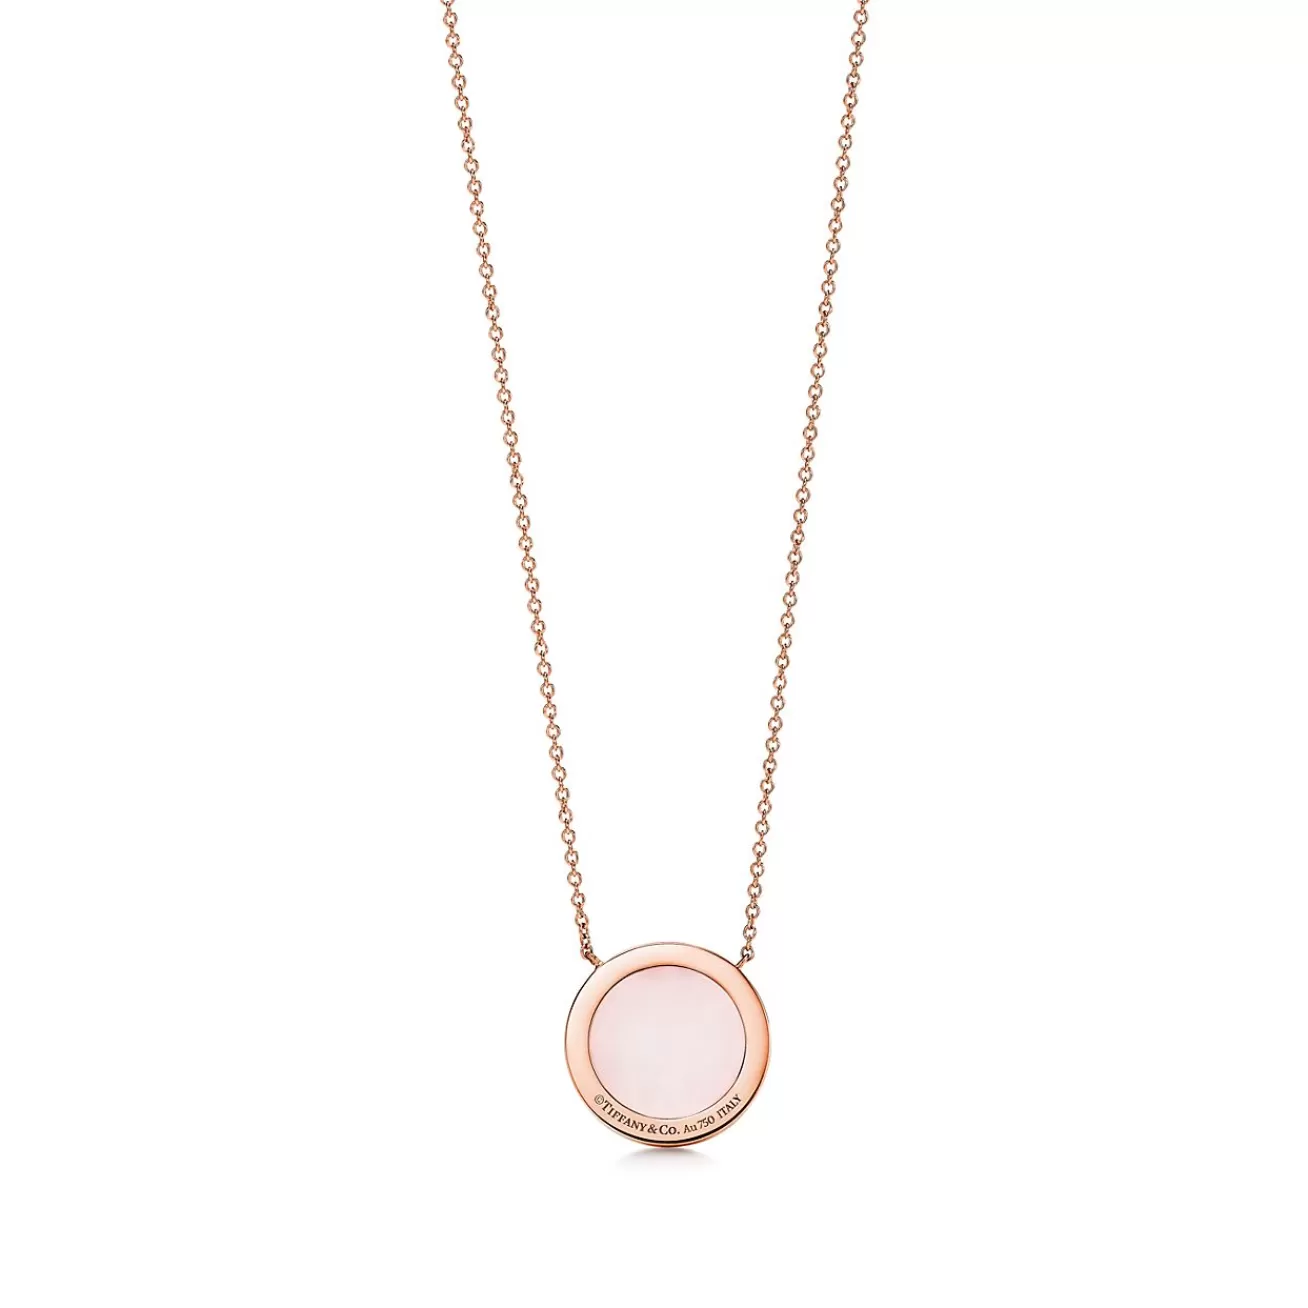 Tiffany & Co. Tiffany T diamond and pink opal circle pendant in 18k rose gold. | ^ Necklaces & Pendants | Rose Gold Jewelry